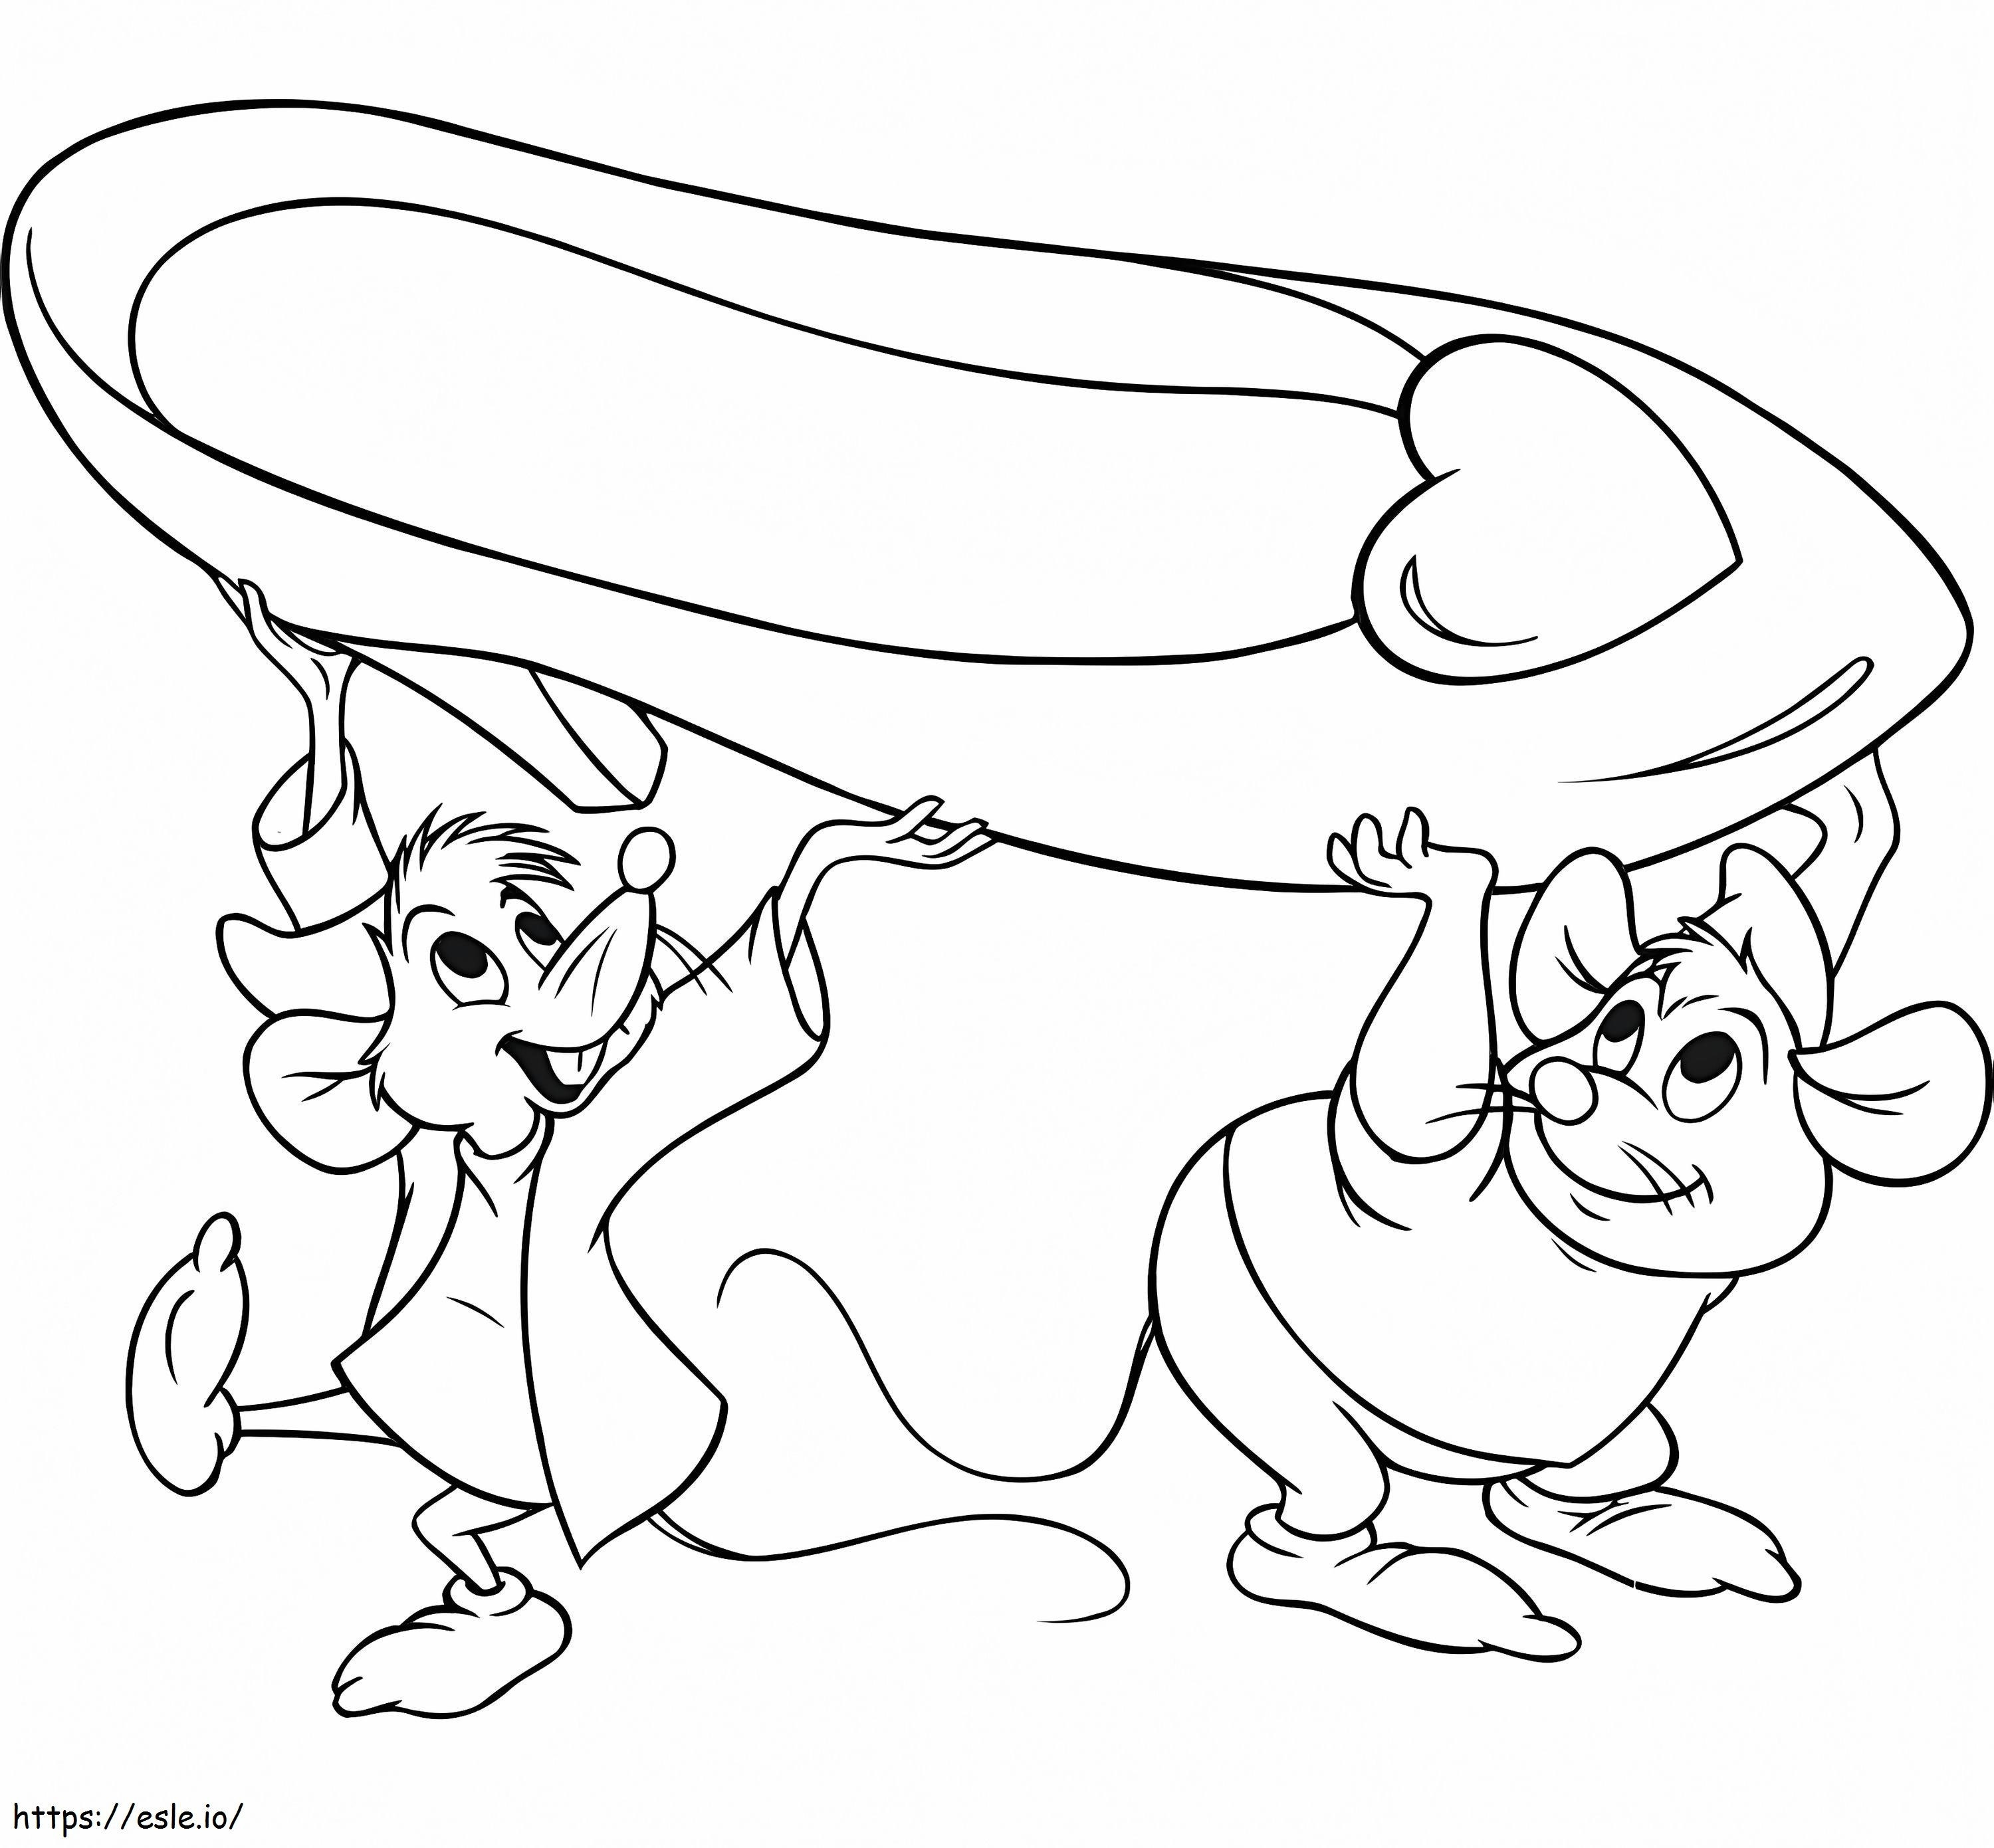 Jaq And Gus Holding Shoe coloring page